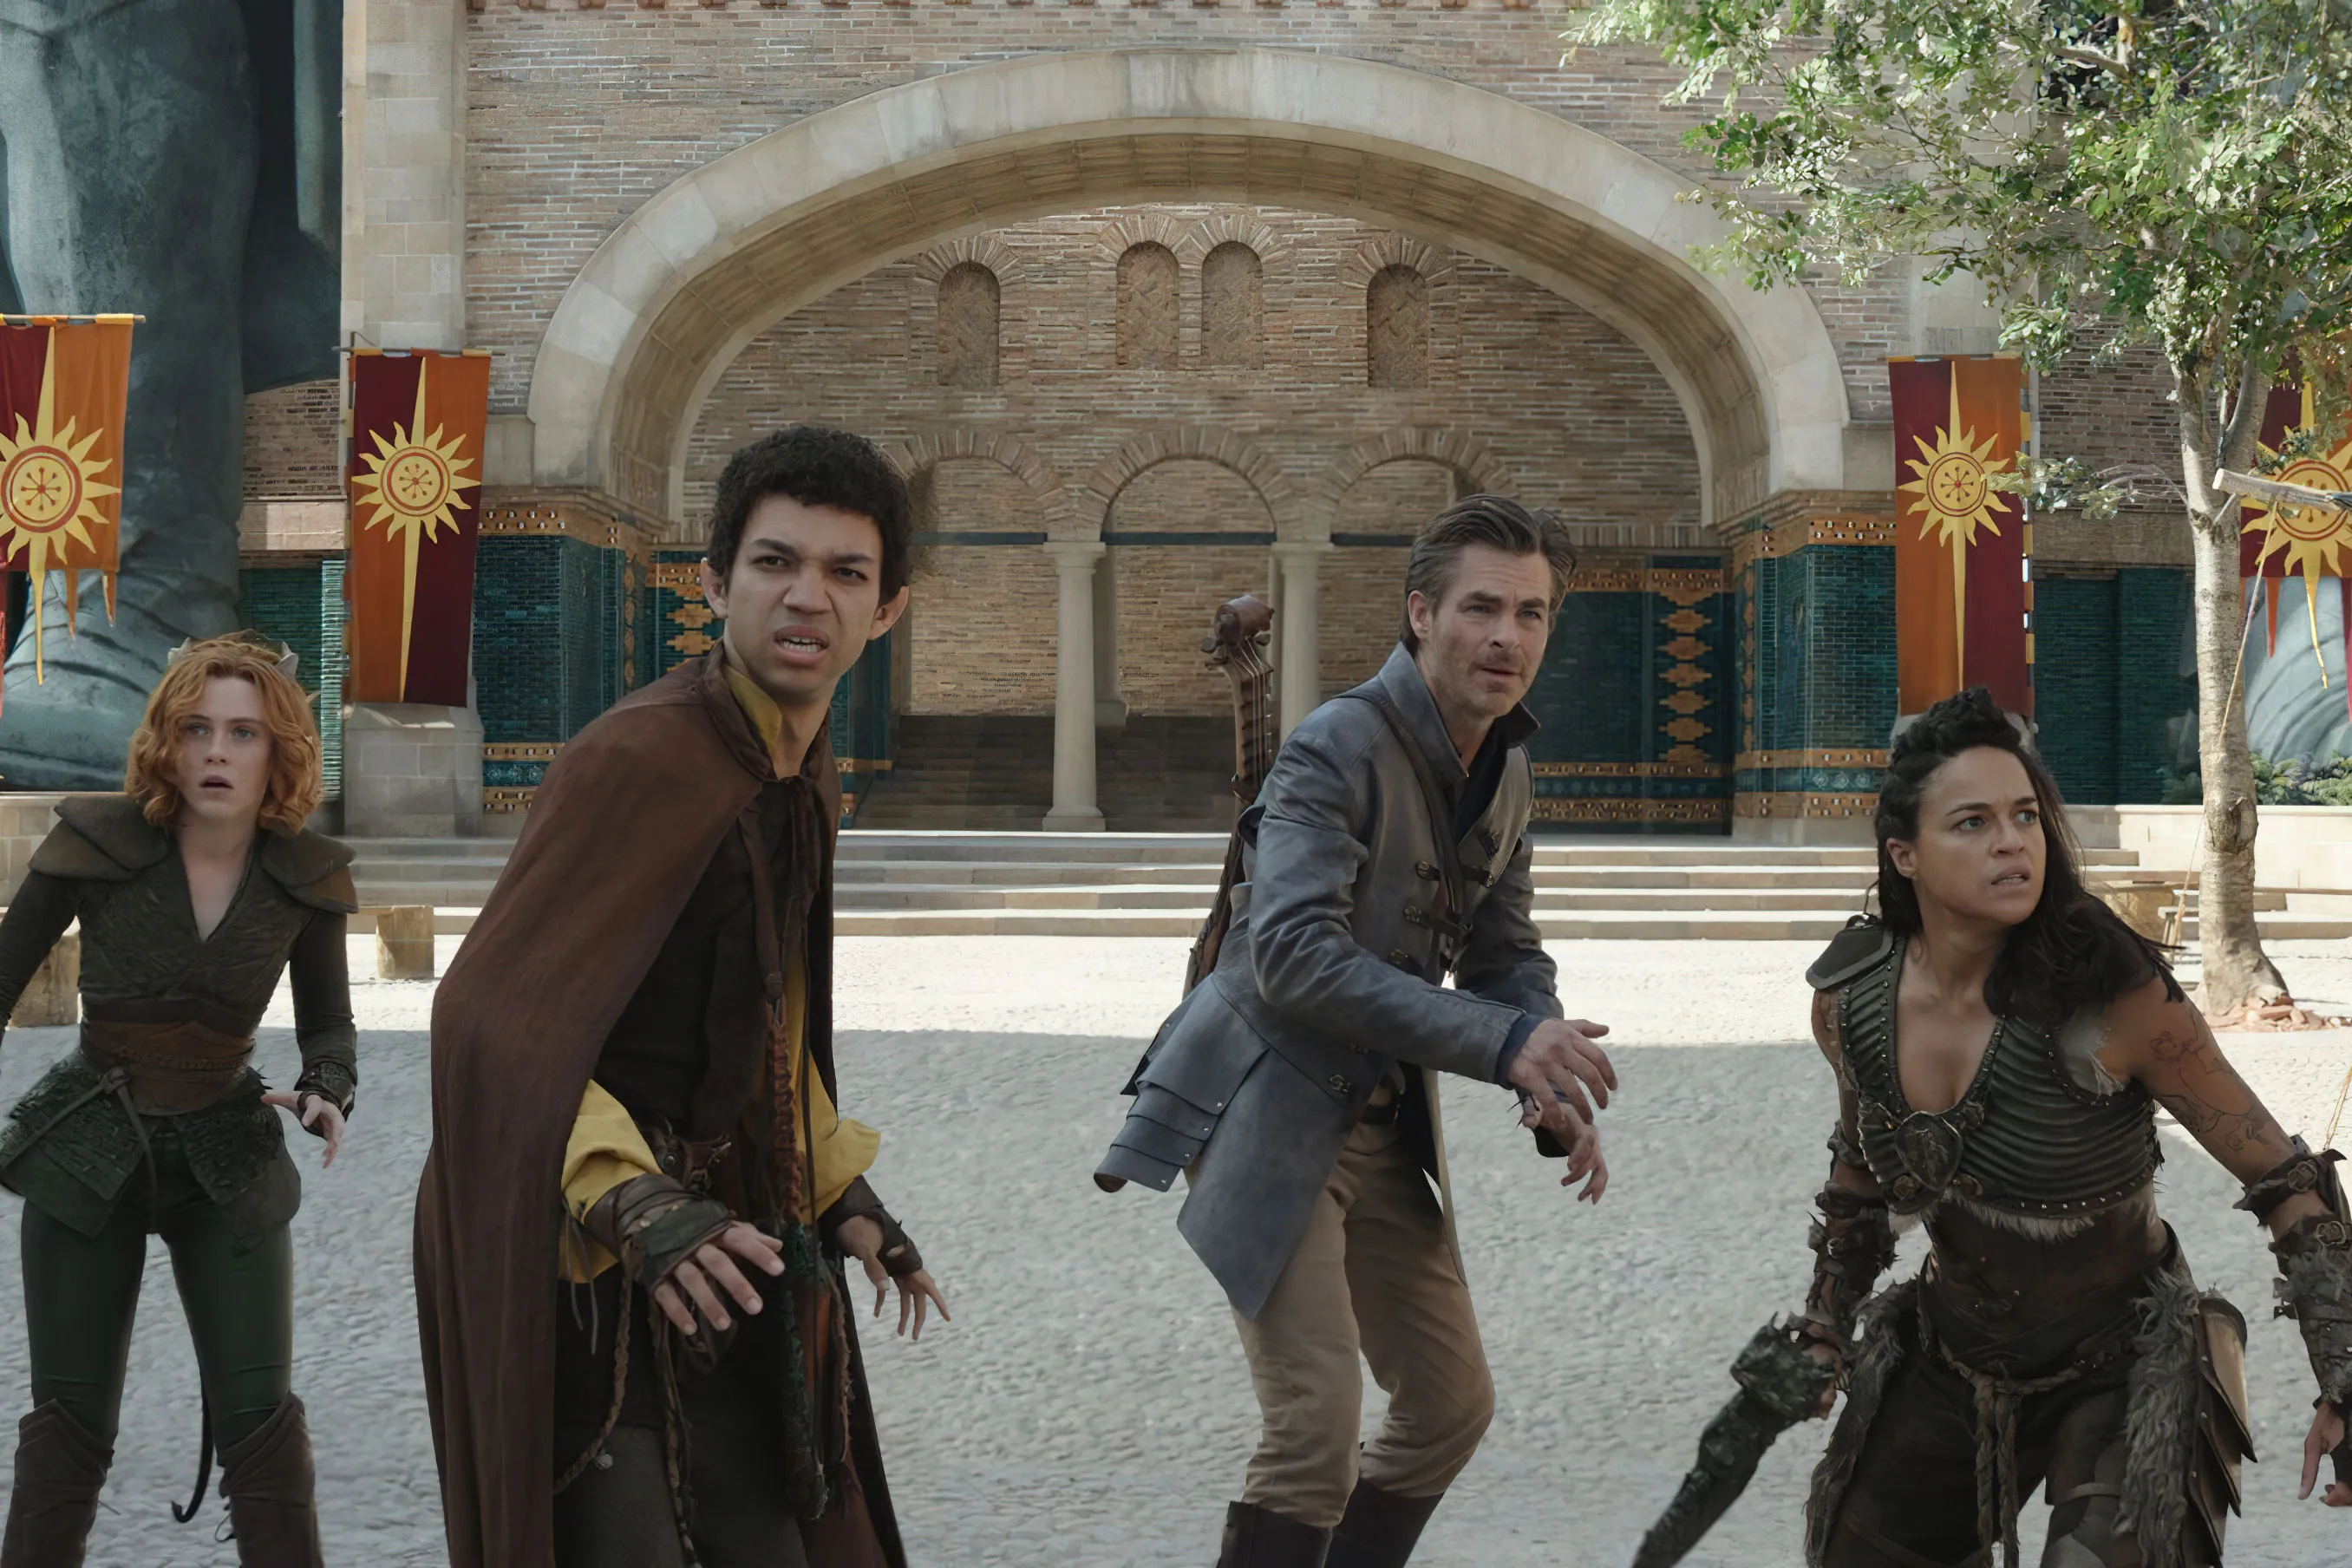 In a cobblestoned medieval-looking courtyard, four people stand in a line looking ahead in fear, ready to attack. From left to right: a female druid, a male half-elf sorcerer, a male bard, and a female barbarian.